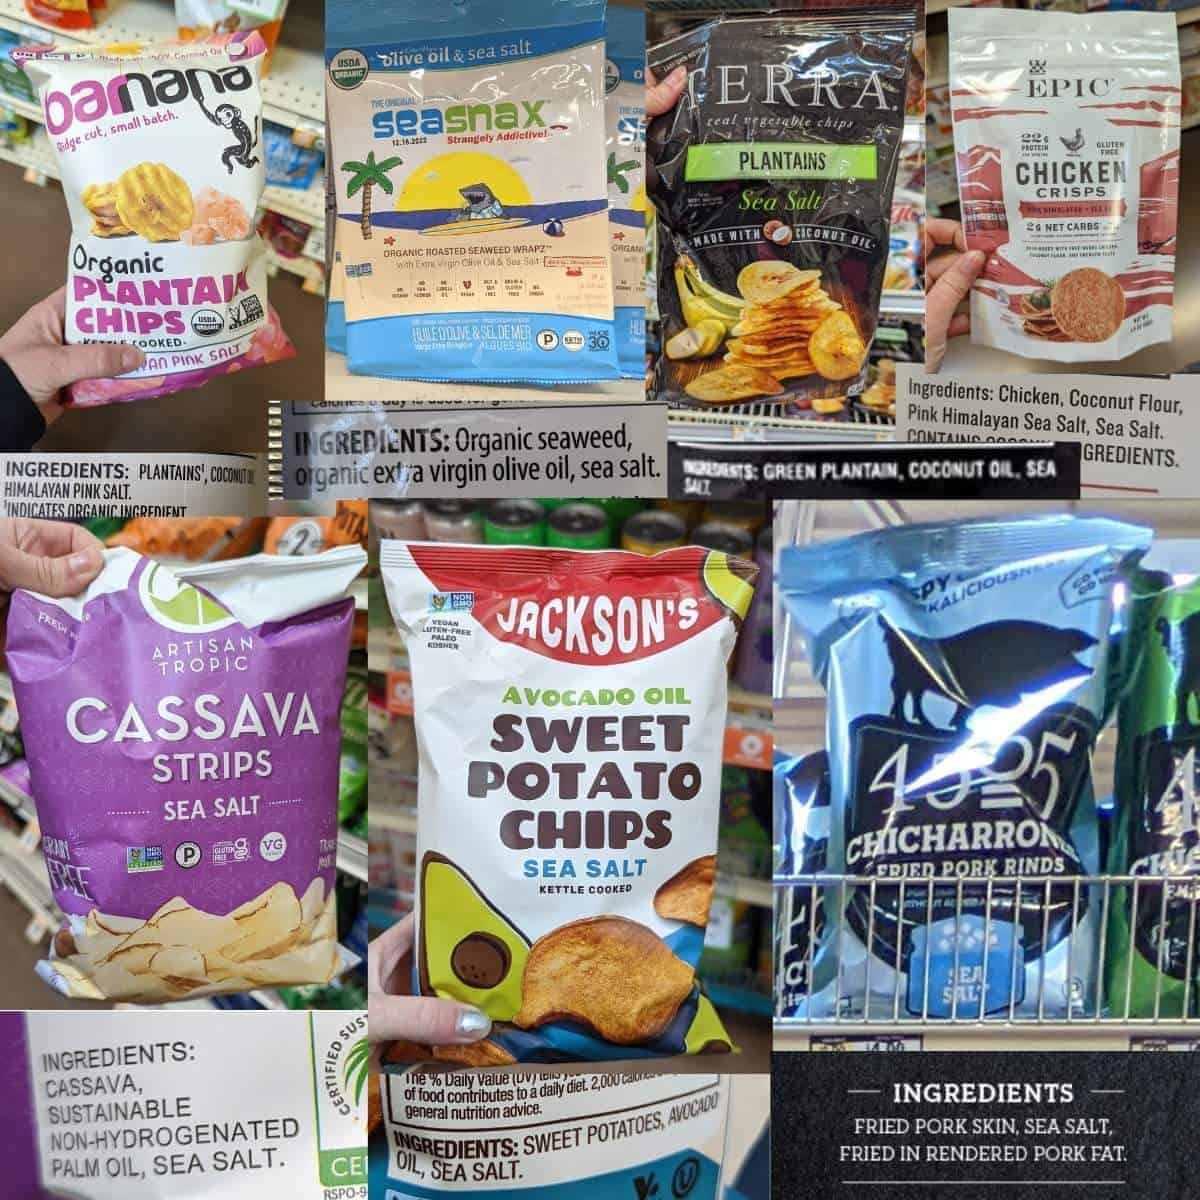 Barnana plantain chips, sea snax, terra plantain chips, epic chicken crisps, artisan tropic cassava strips, Jackson's sweet potato chips, and 4505 pork rinds with ingredient labels.